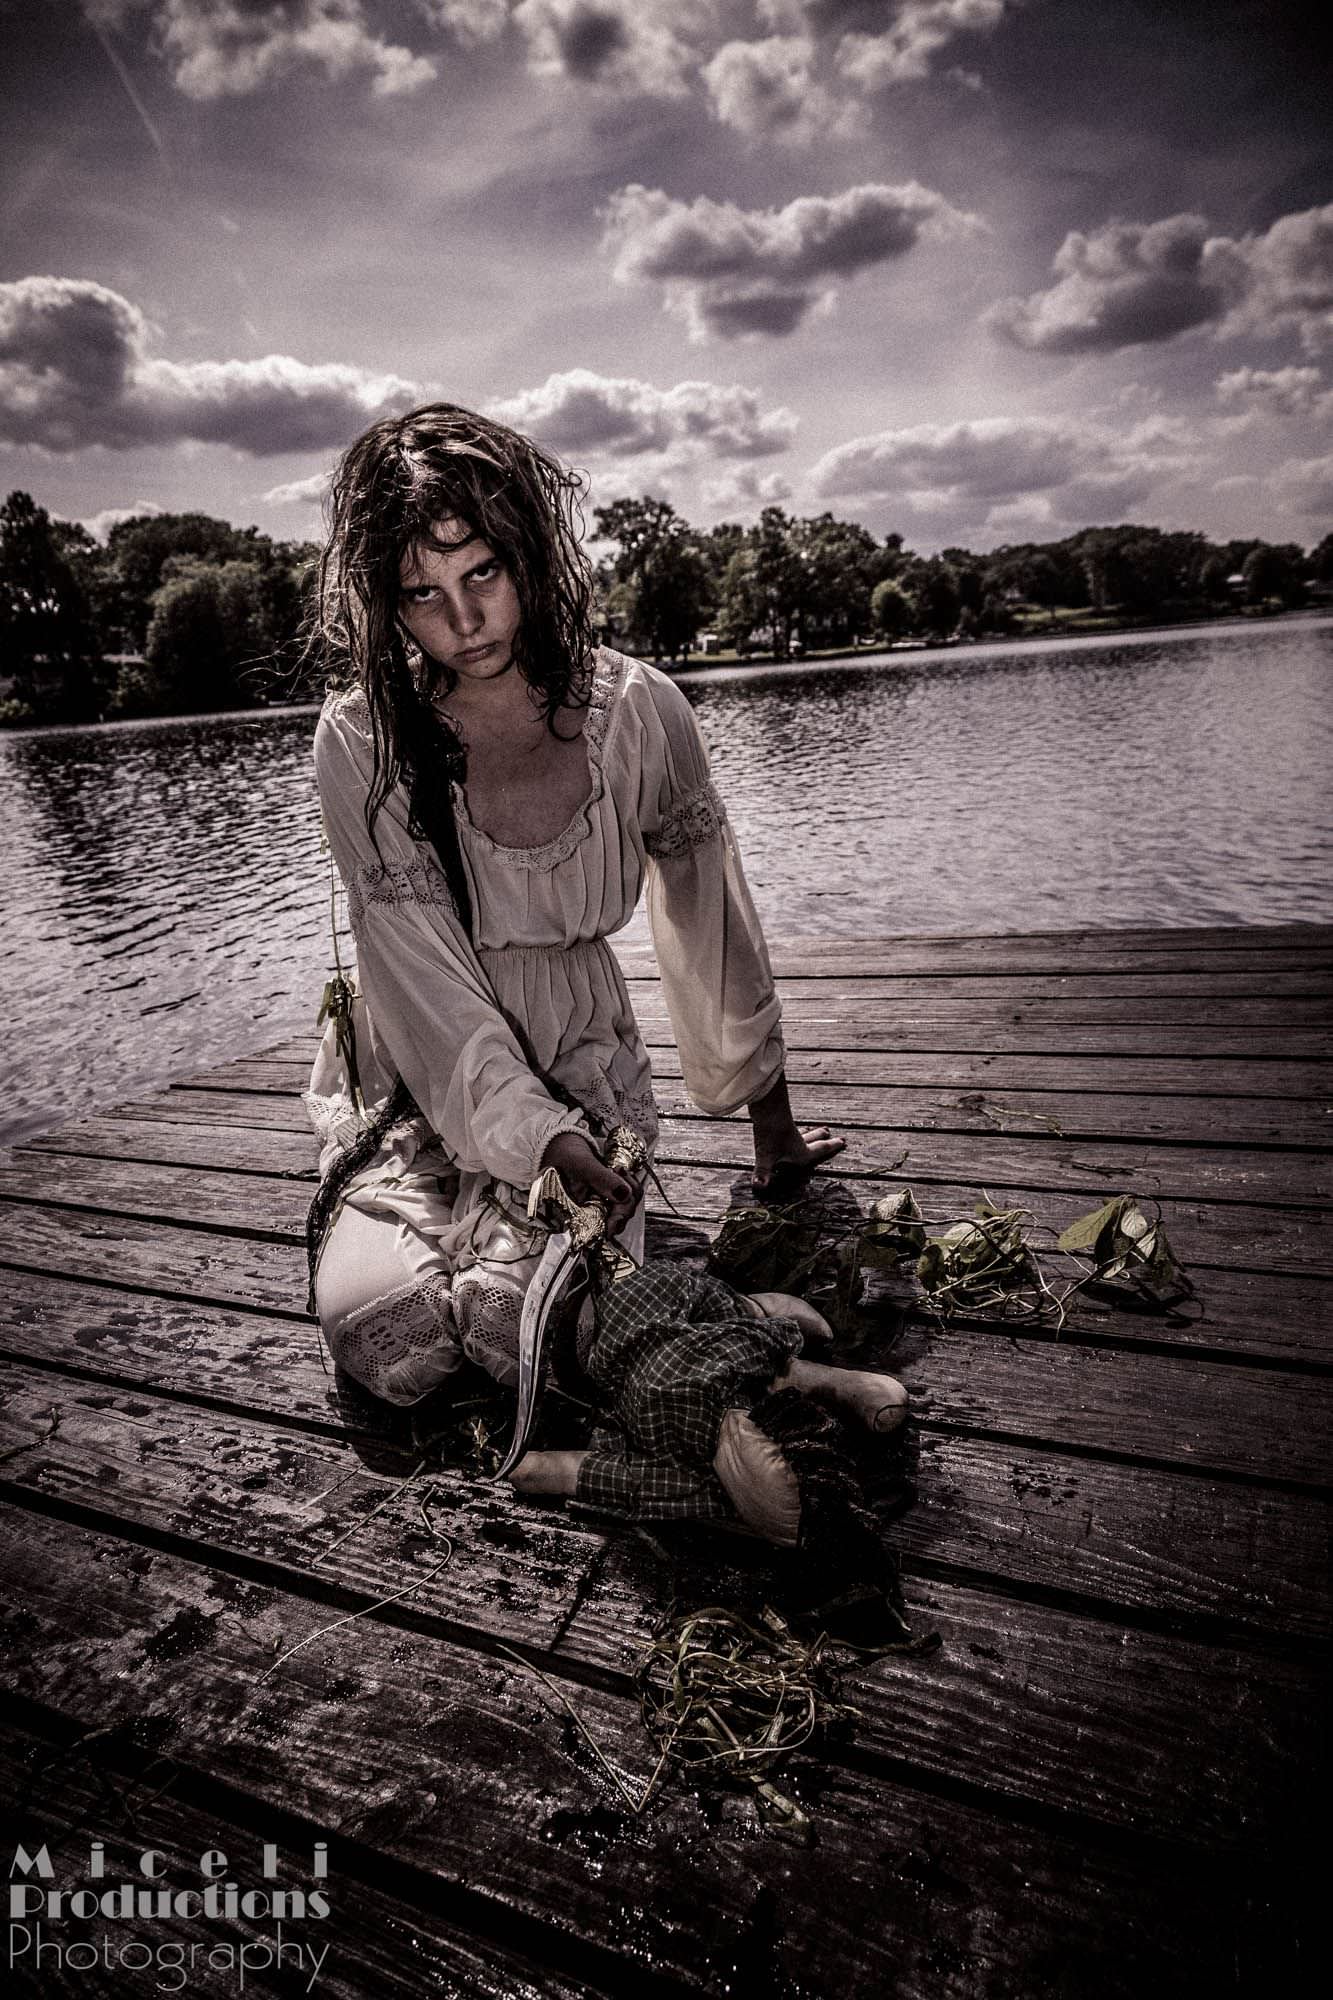 Halloween photography shoot. Scary image of a young girl that crawled out of a lake and is holding a knife over a voodoo doll. Photo by Miceli Productions